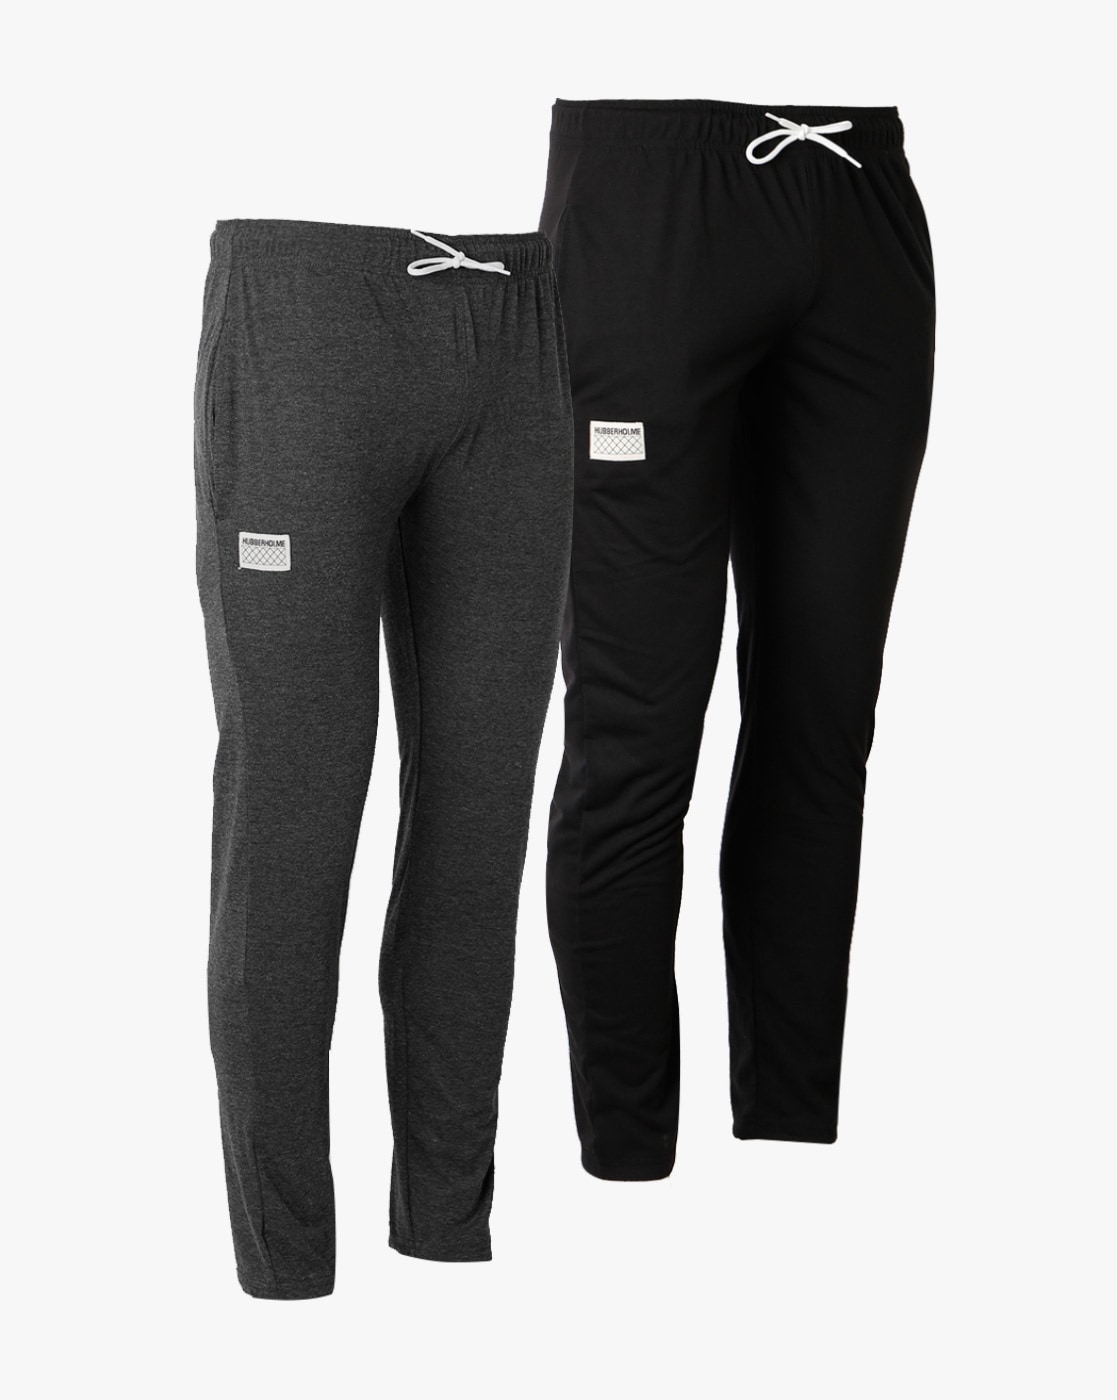 Buy White Track Pants for Men by Aarees Online | Ajio.com